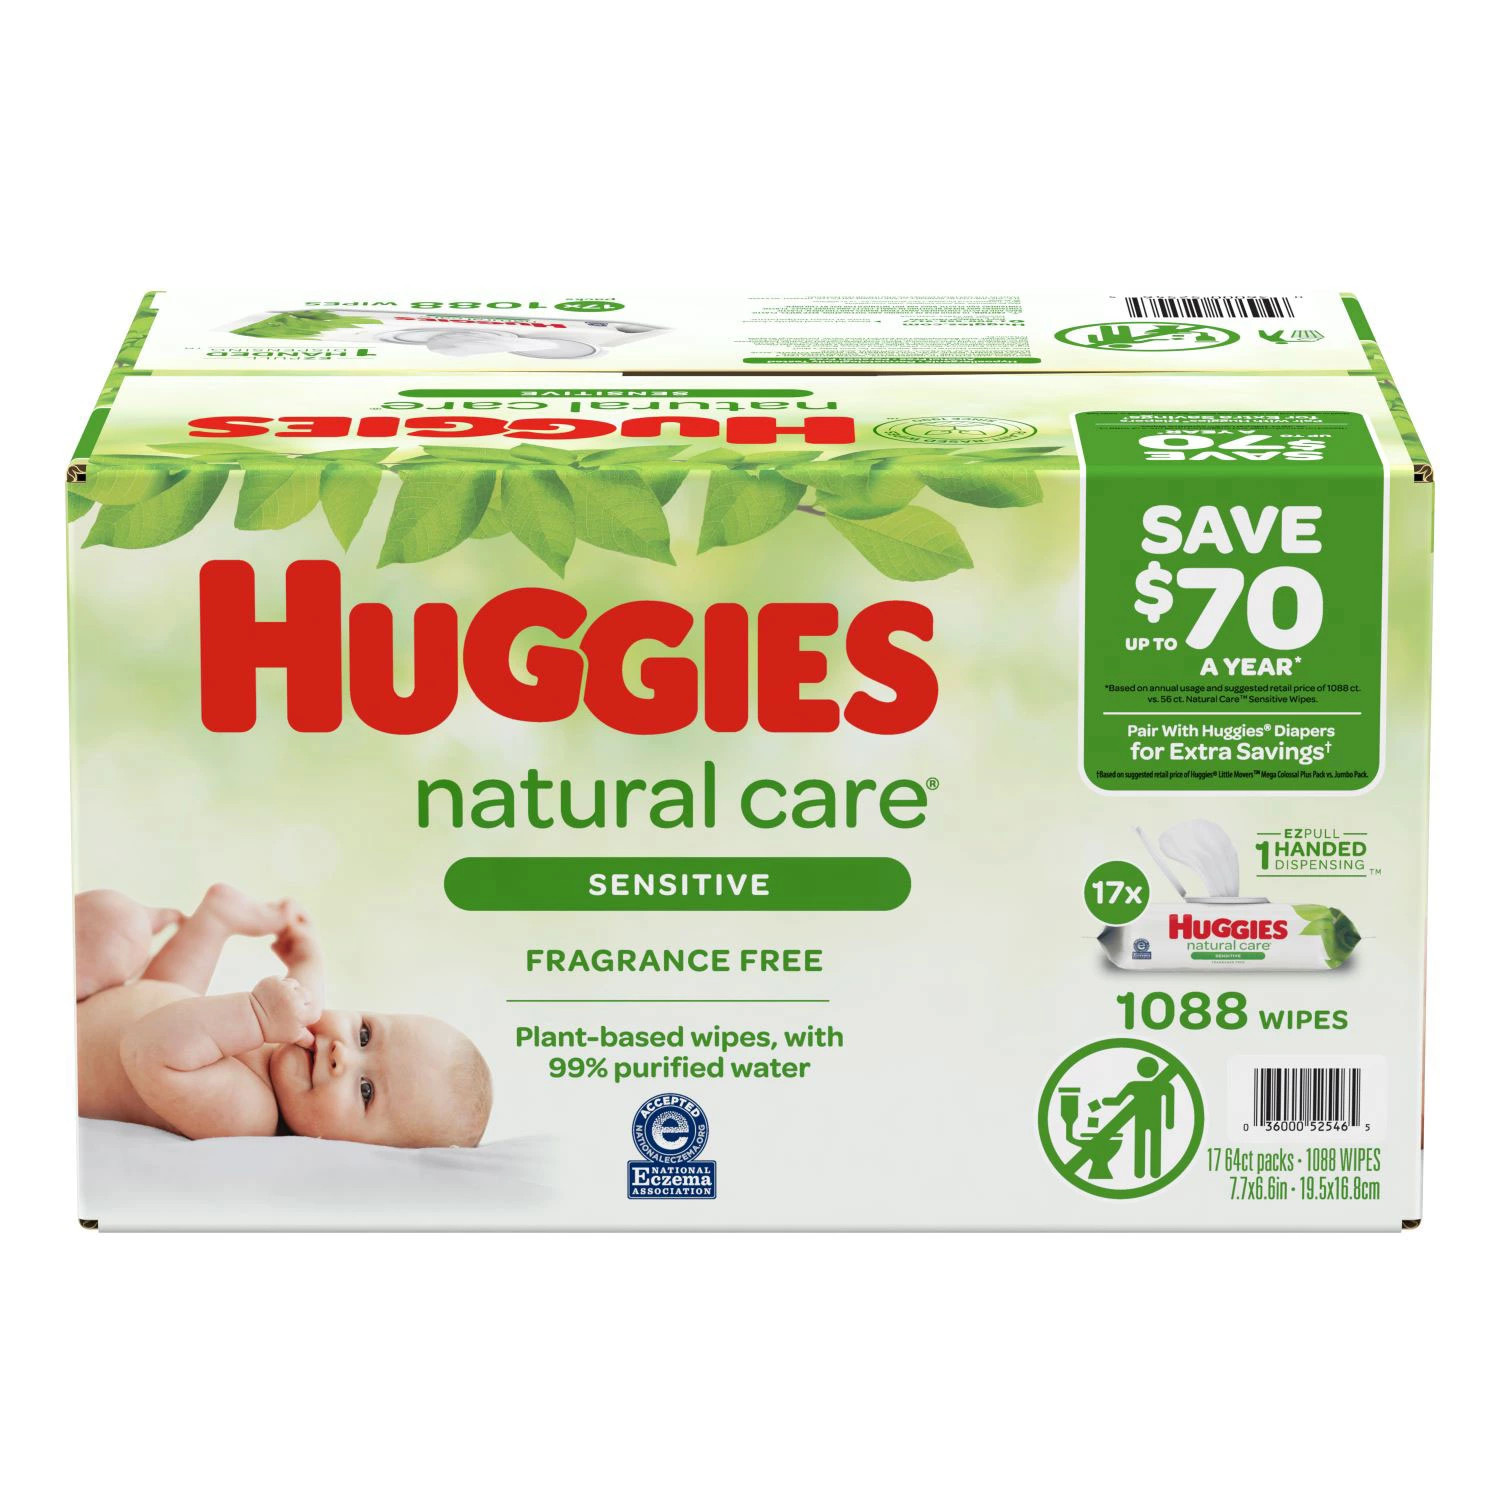 Huggies Natural Care Baby Wipes Review